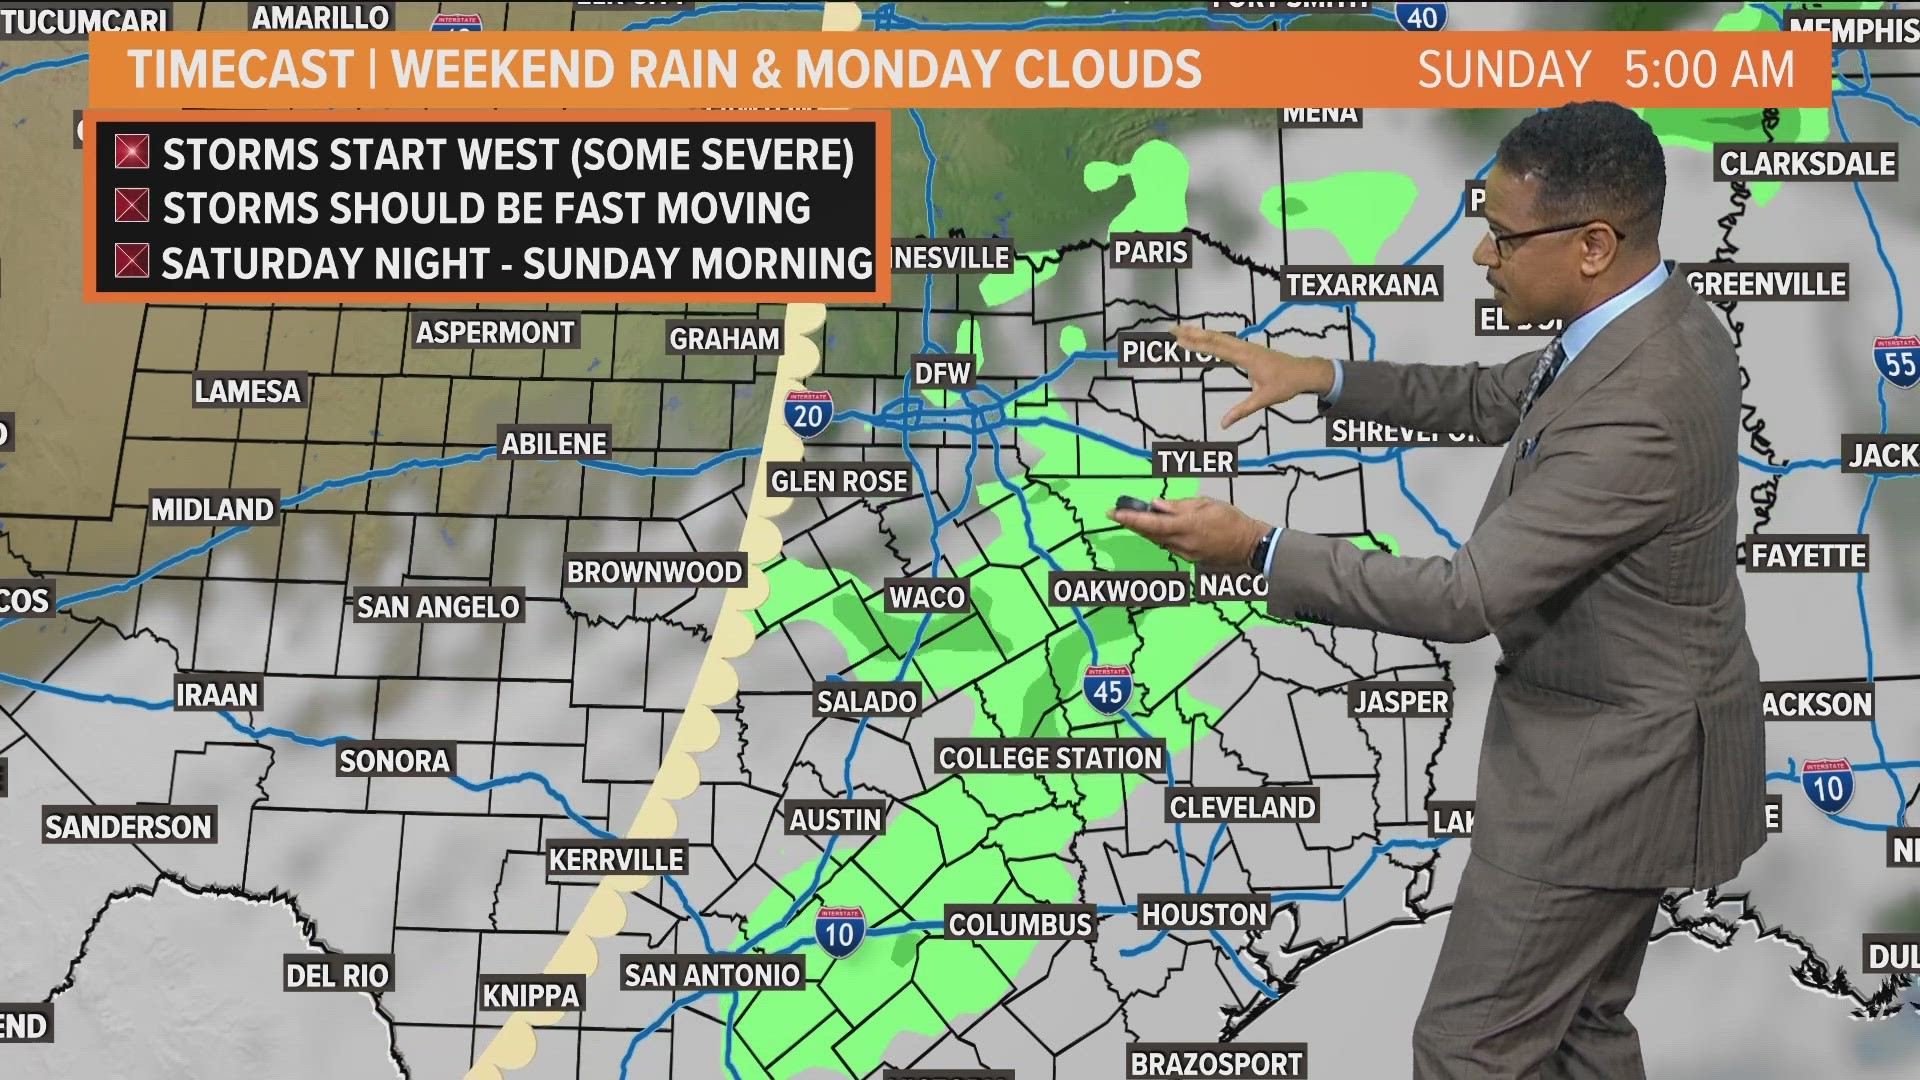 Greg Fields has a look at our weekend rain forecast in North Texas.